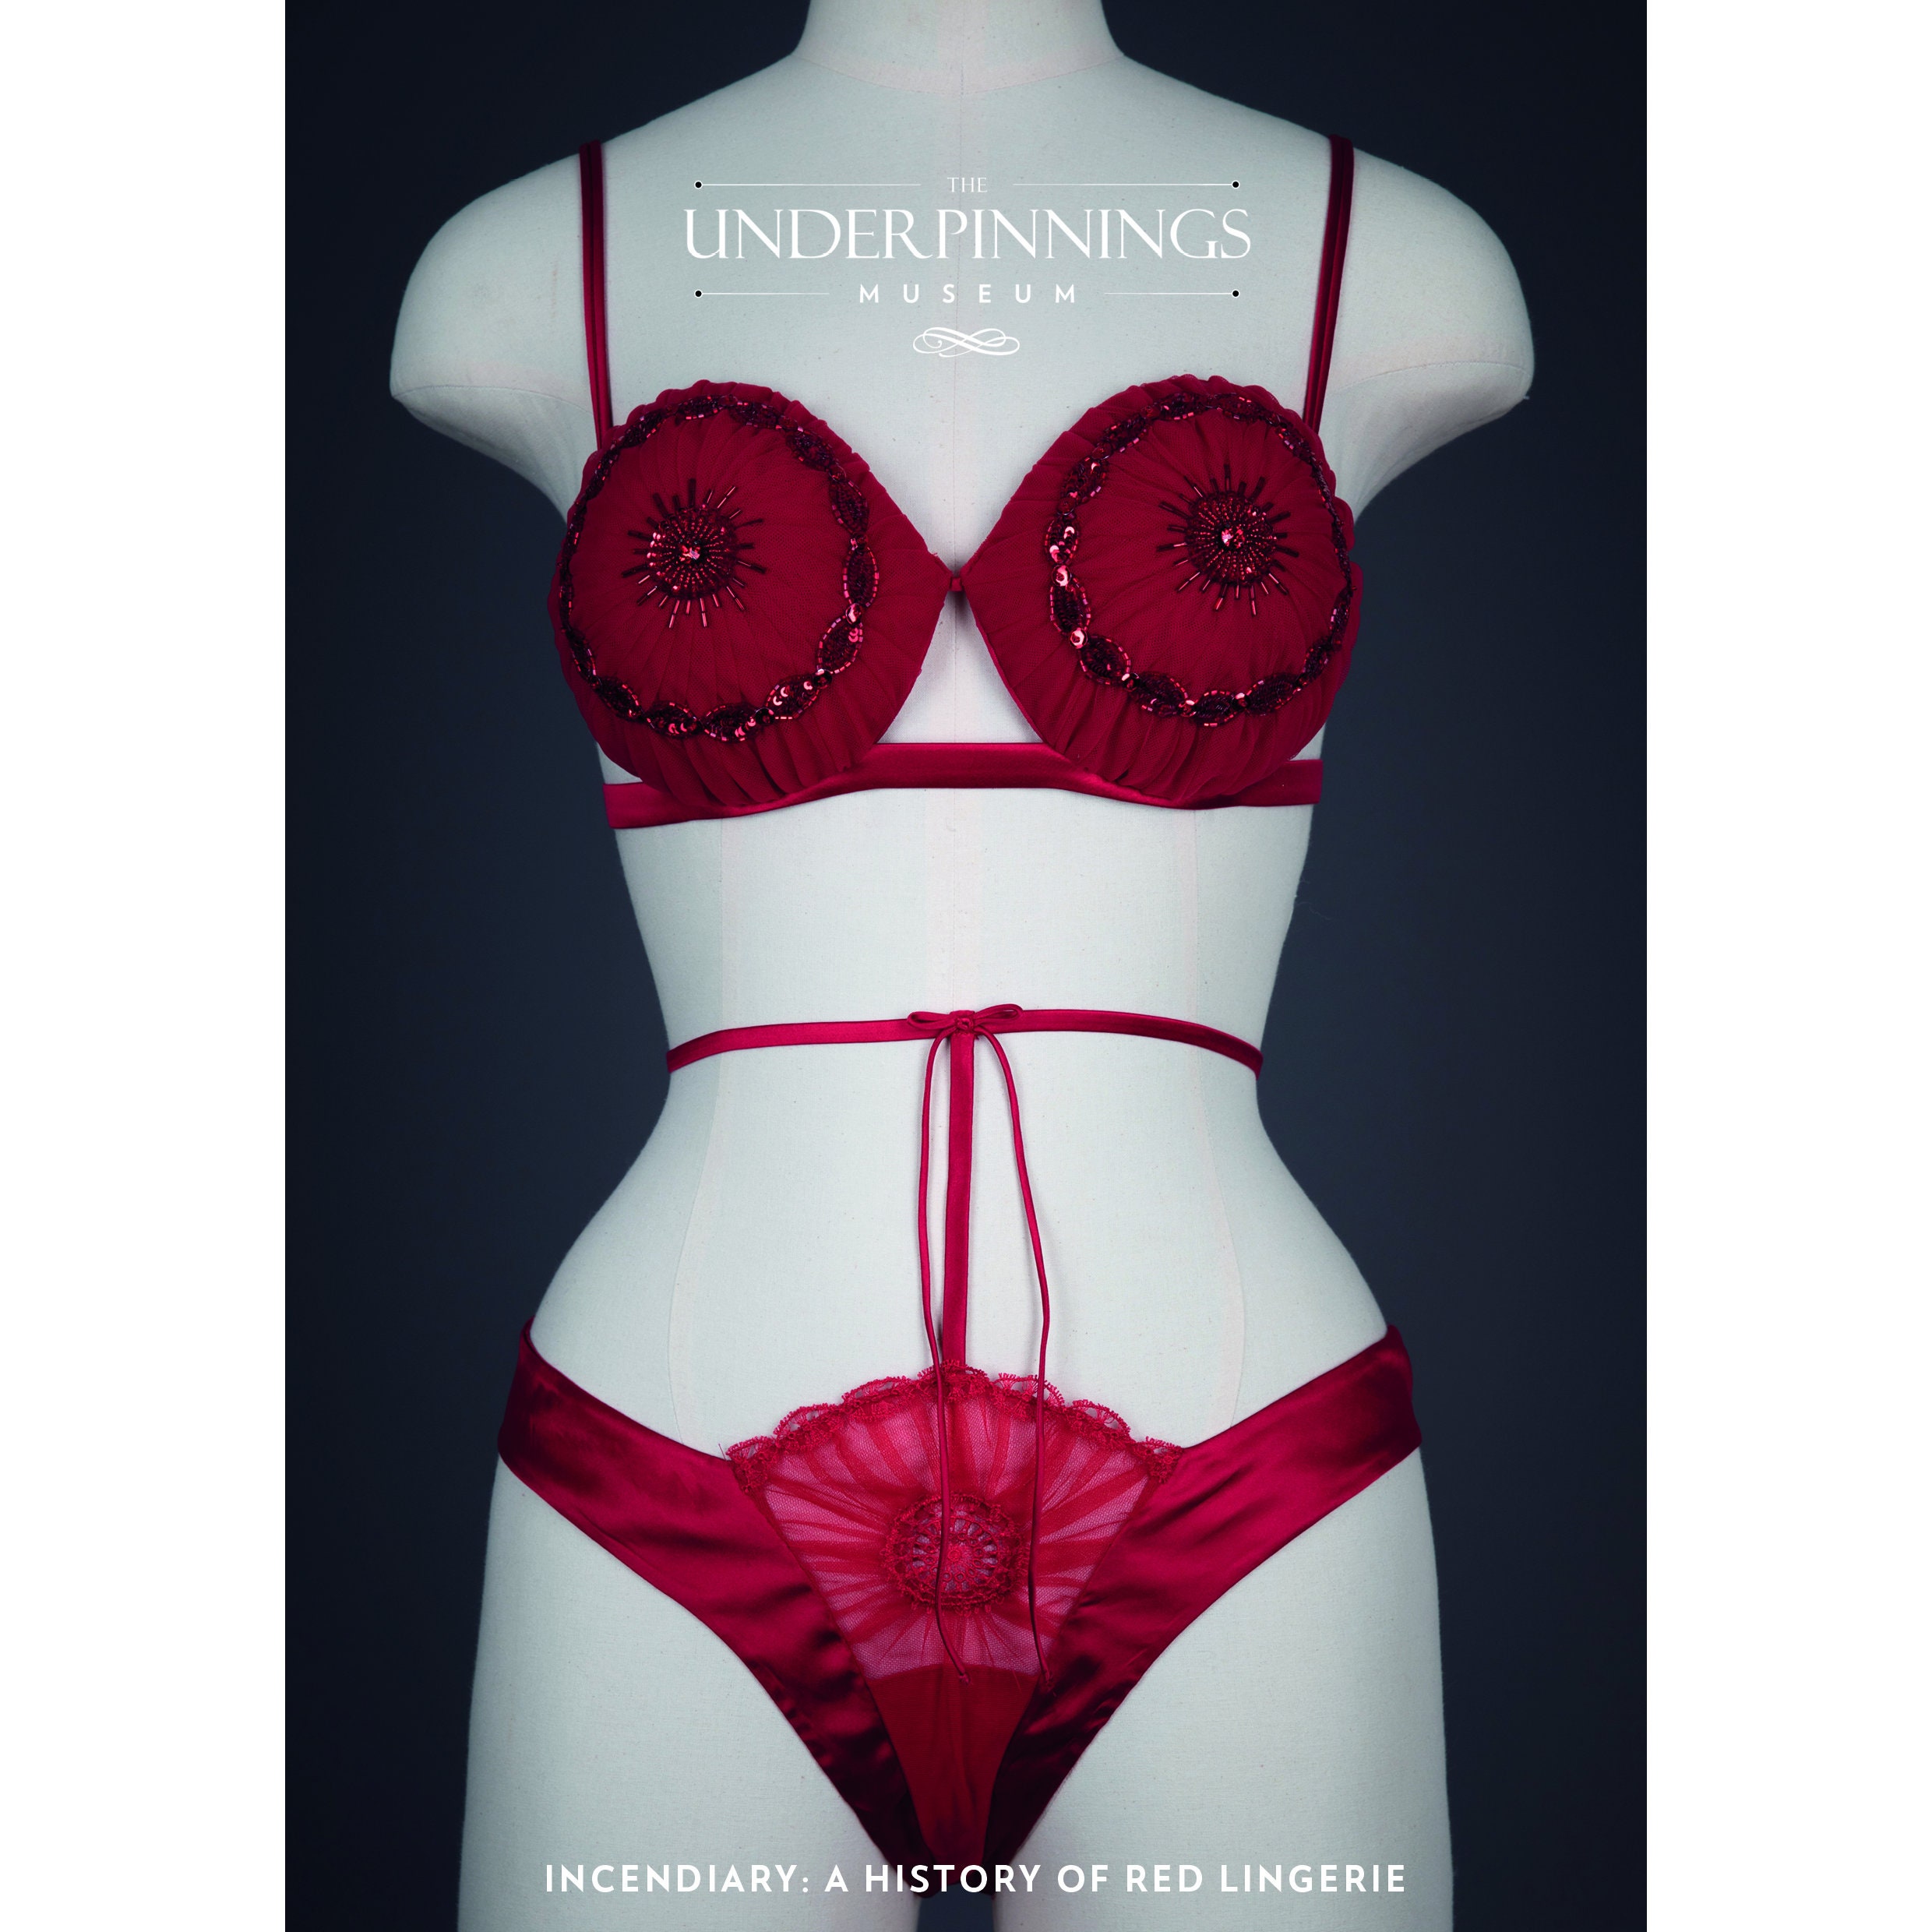 The Underpinnings Museum on Instagram: The 1930s saw a change in